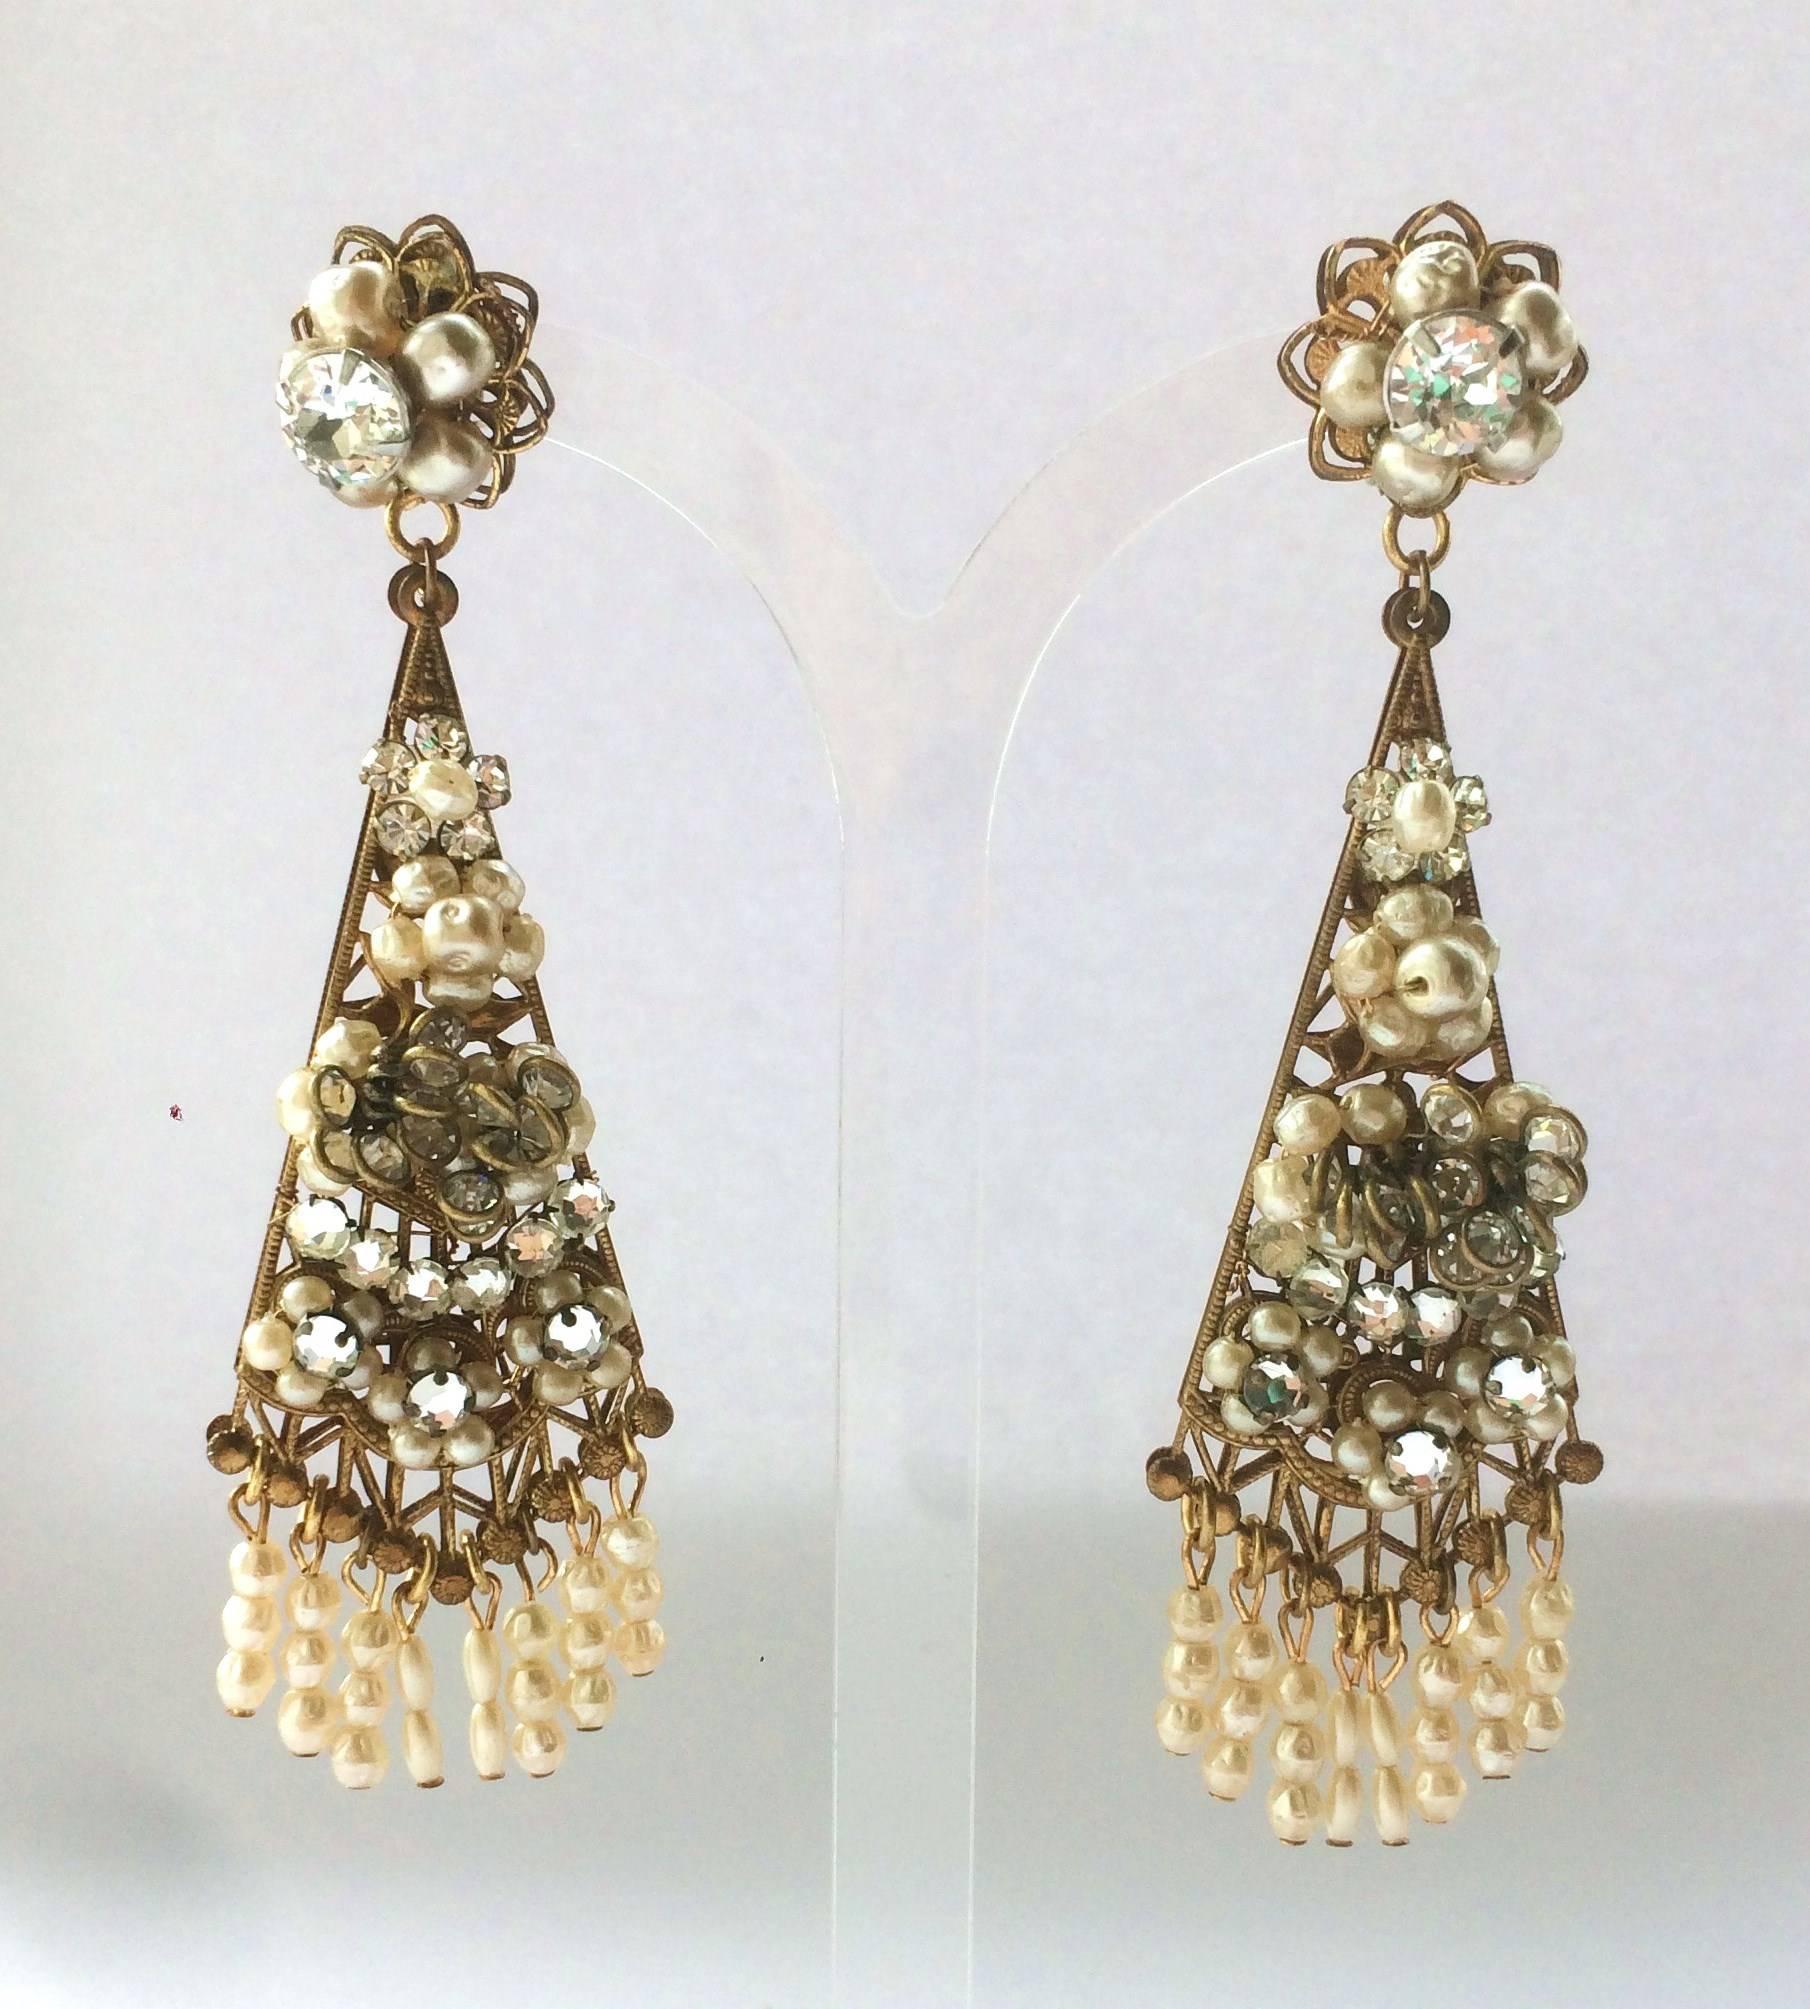 Stunning and dramatic, very long 'chandelier' earrings, hand made, from the 1950s by Robert de Mario. With long baroque pearl fringing and gilt filigree backing, they are perfect as go-to earrings that cascade onto or past the shoulders!
Robert De